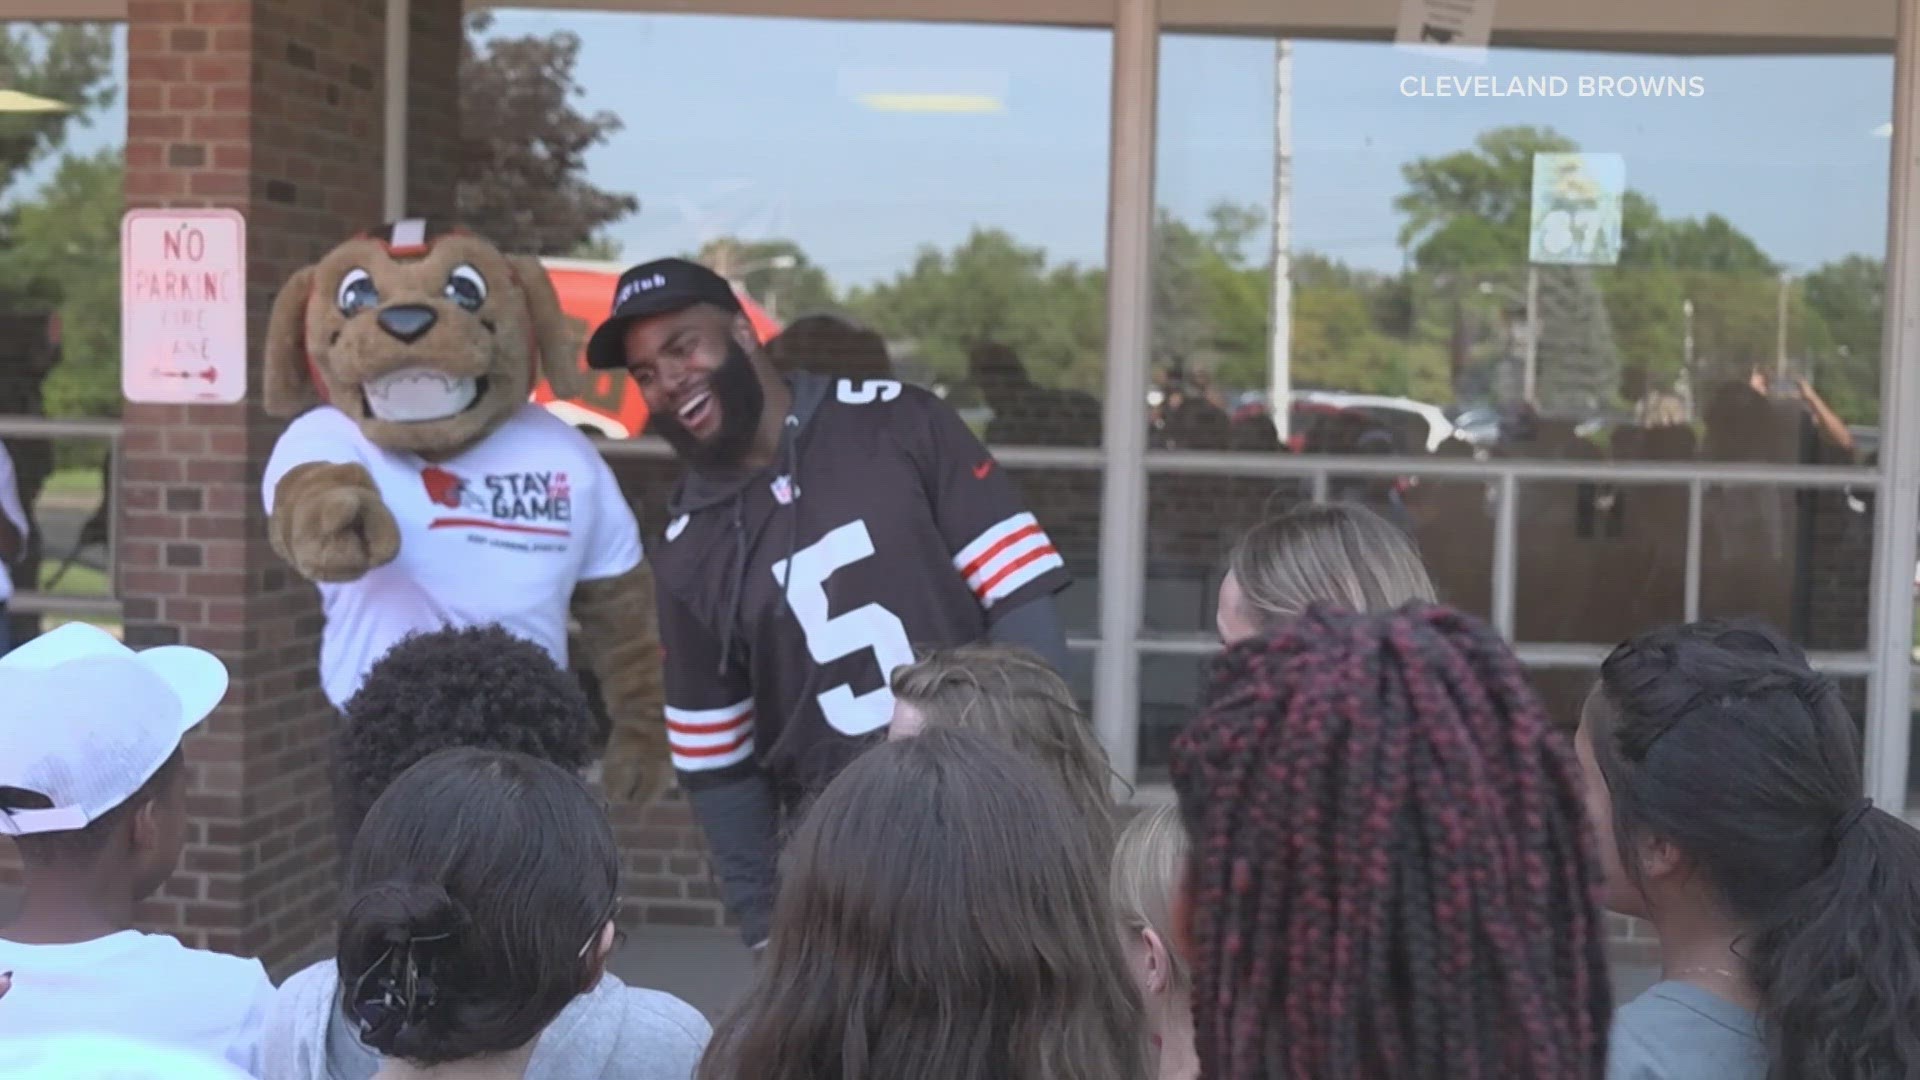 To win in the classroom, you must show up. That's why the Browns are teaming up with Shaker Heights schools to help improve attendance.